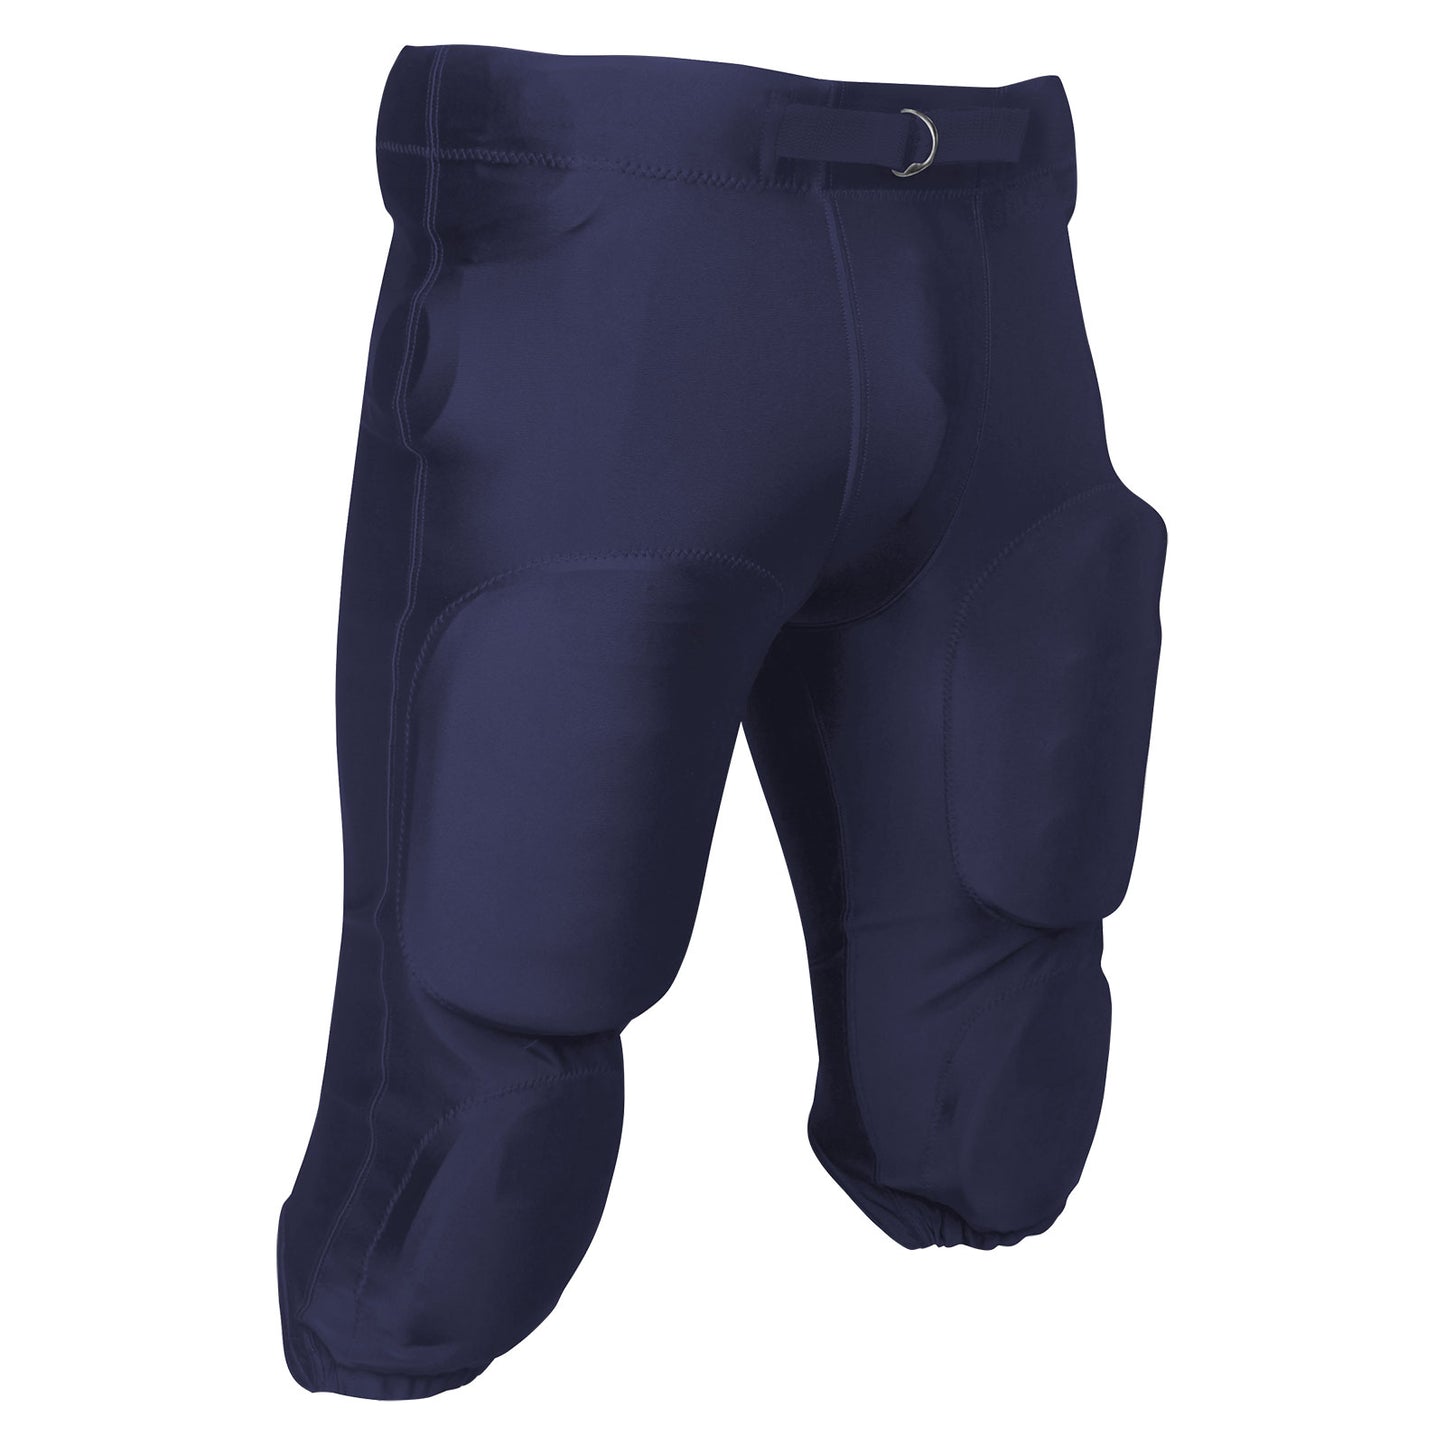 Traditional Football Pant With Pad Pockets NAVY BODY